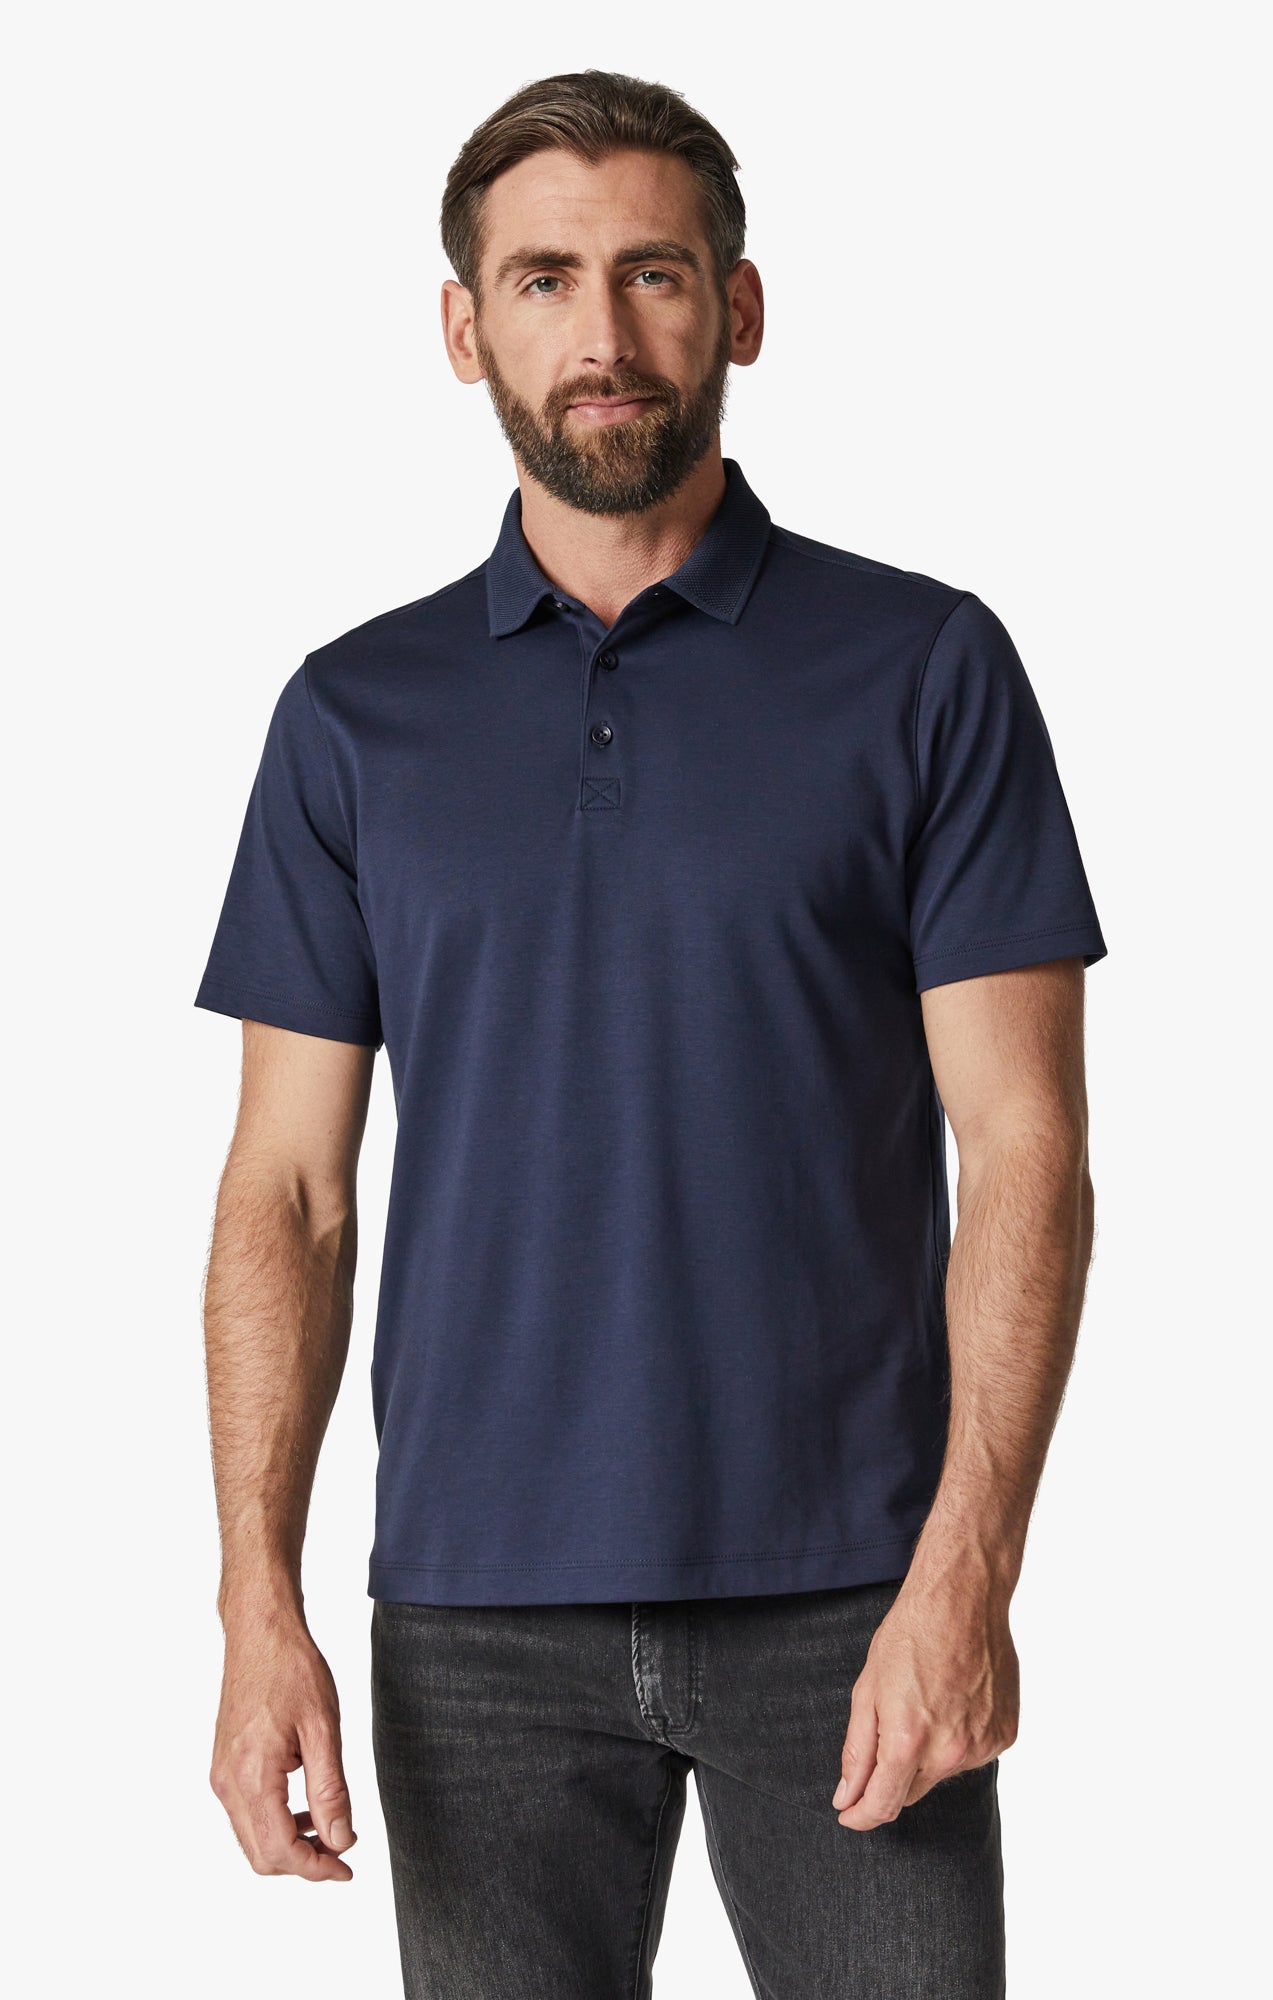 Polo T-Shirt In Navy Image 1